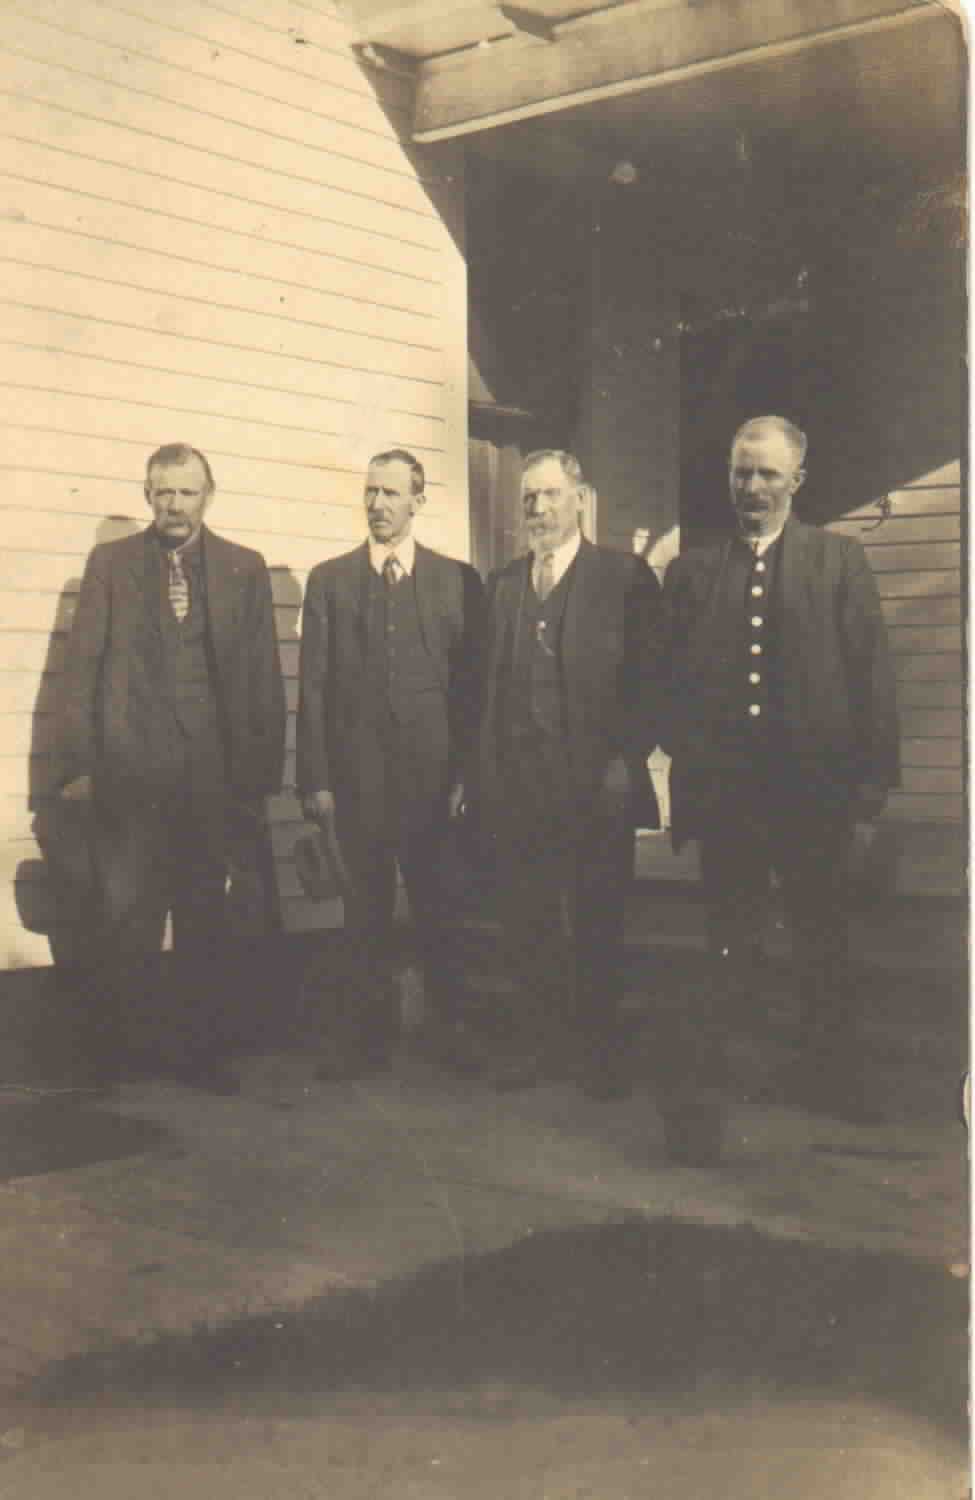 Andrew Anderson, second from right